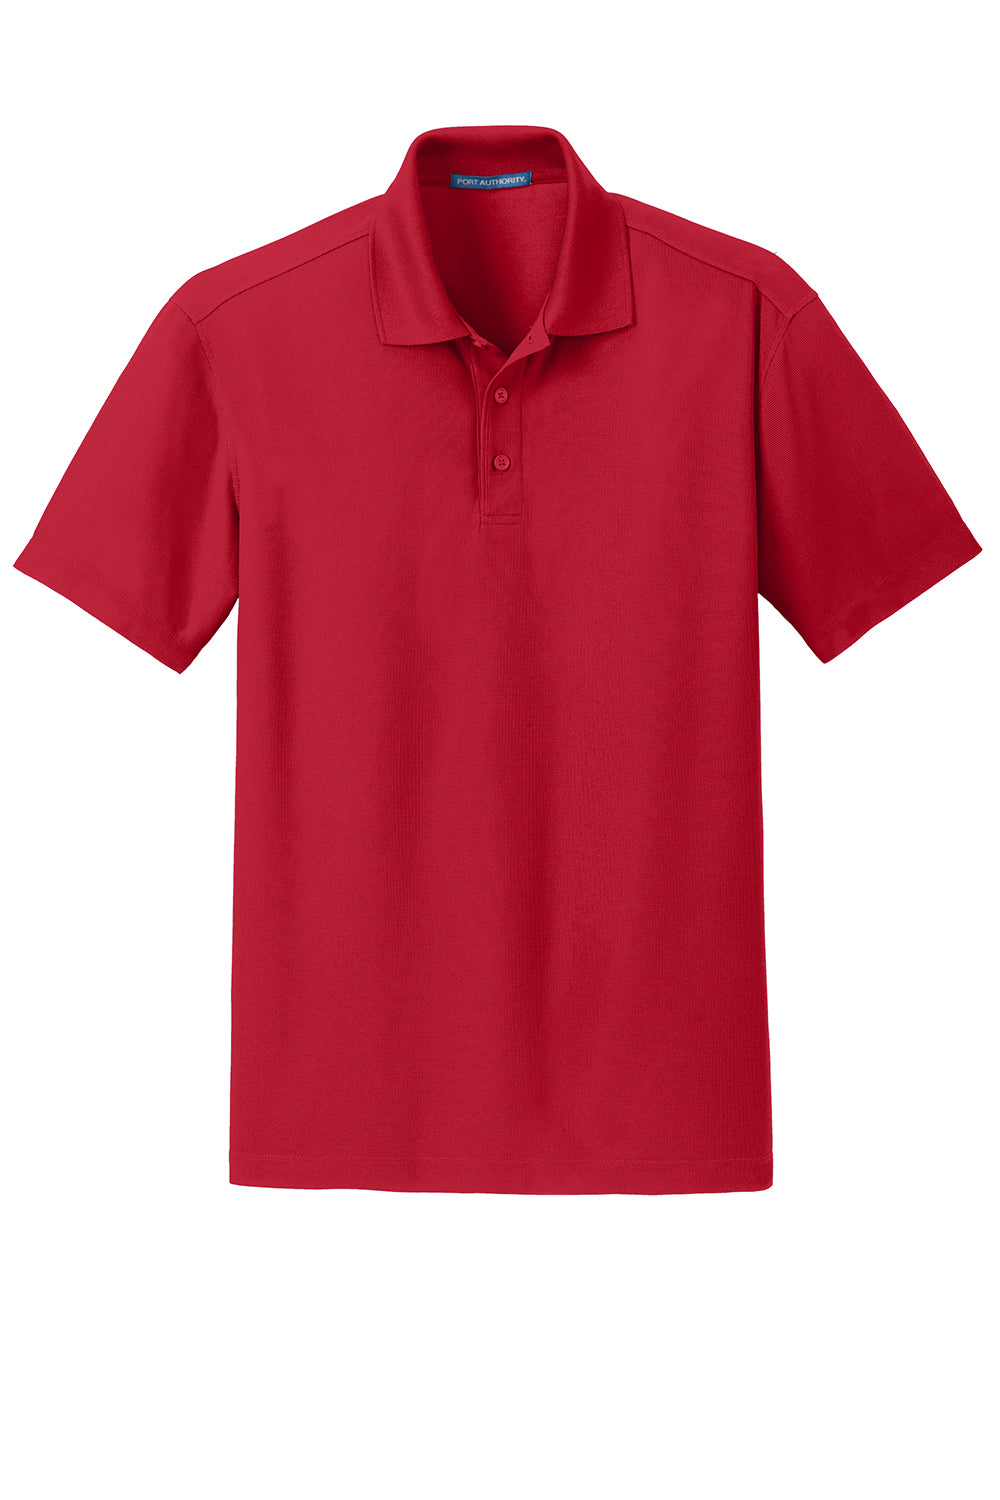 Port Authority K572 Mens Dry Zone Moisture Wicking Short Sleeve Polo Shirt Red Flat Front